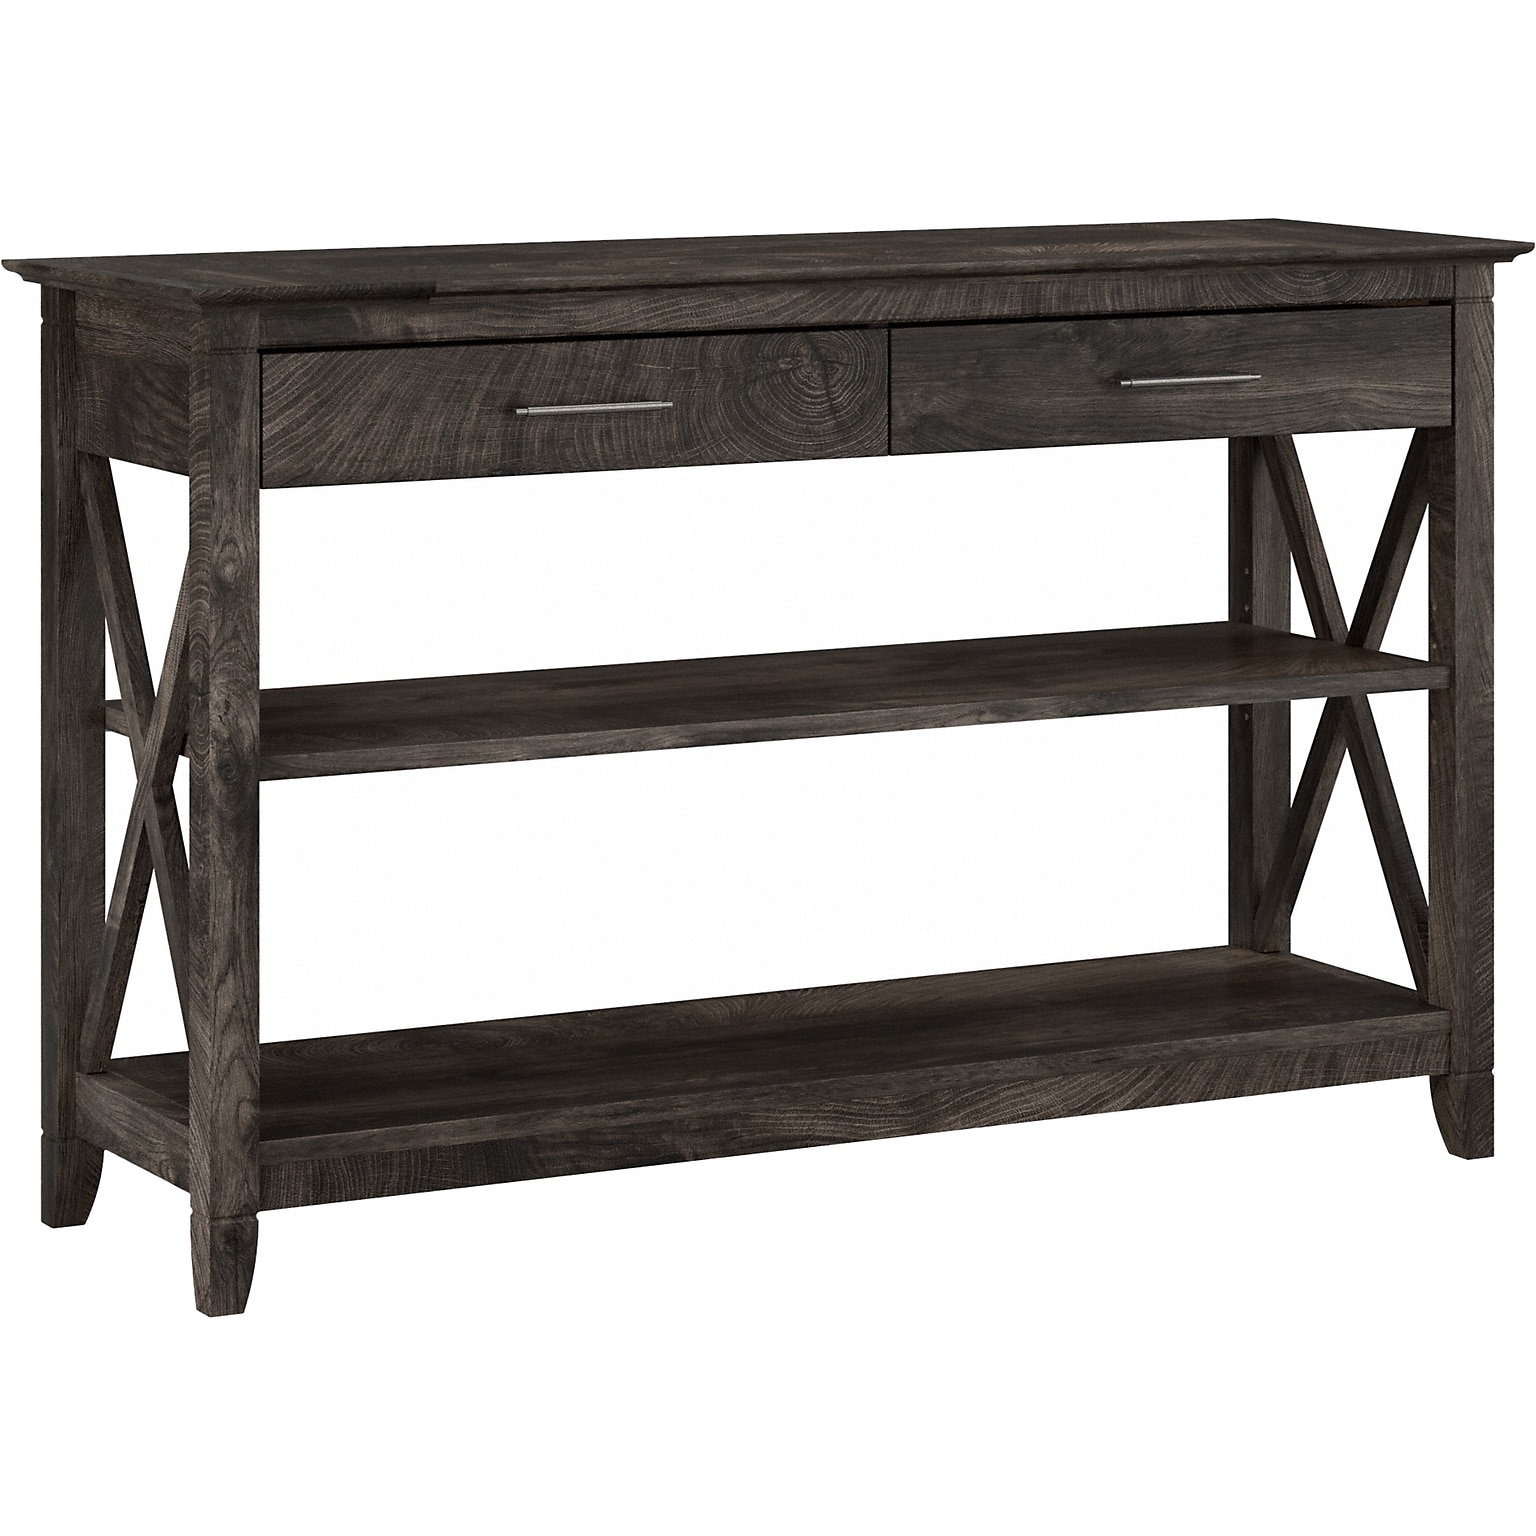 Bush Furniture Key West 47 x 16 Console Table with Drawers and Shelves, Dark Gray Hickory (KWT248GH-03)